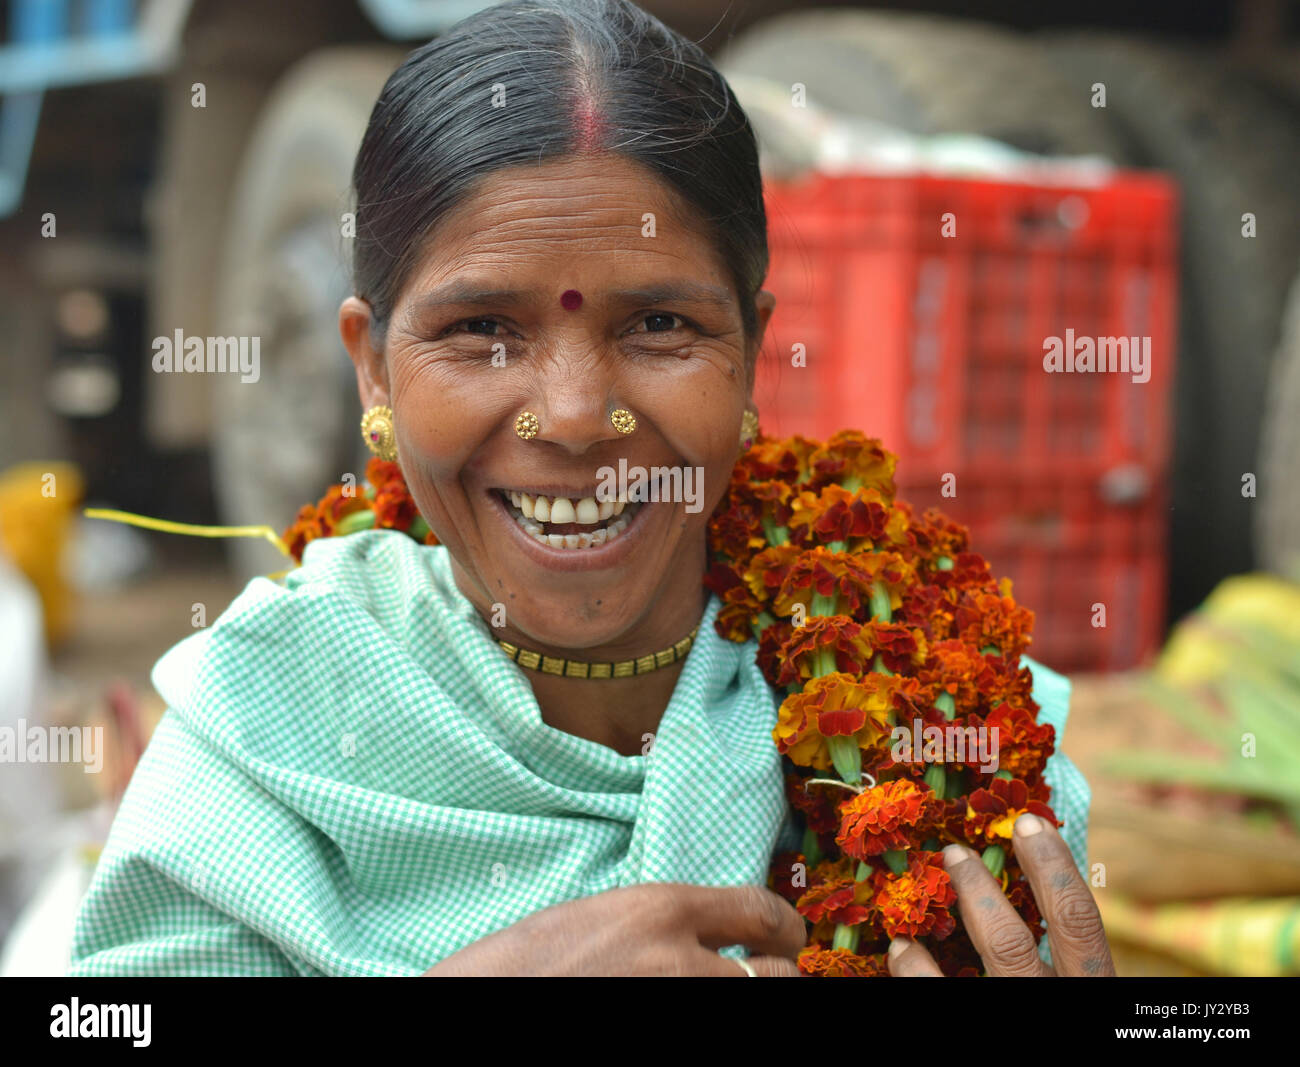 Smiling and laughing Indian Adivasi woman carries a flower garland over her left shoulder and poses for the camera. Stock Photo